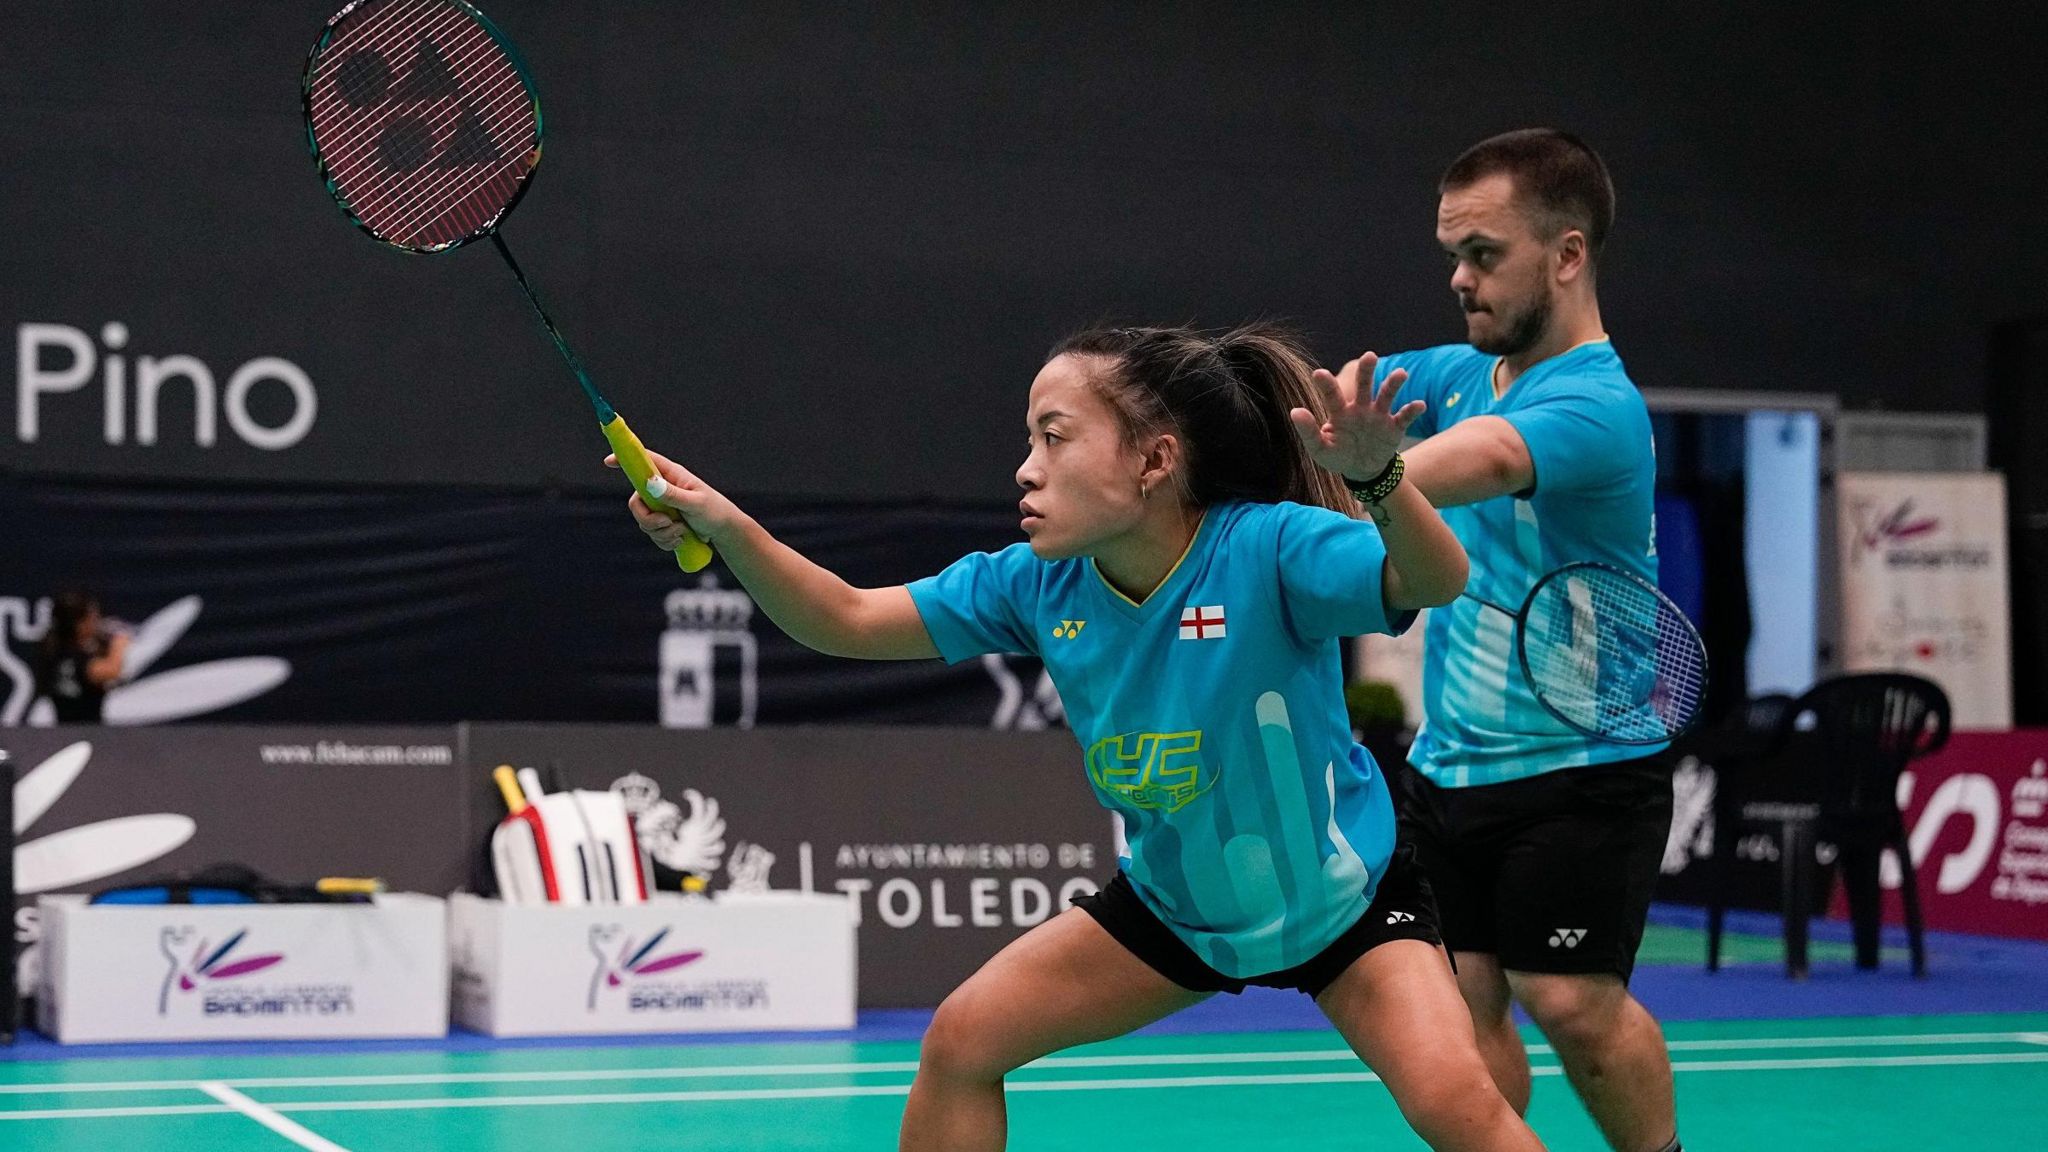 Para-badminton players Rachel Choong and Jack Shephard in mixed doubles action